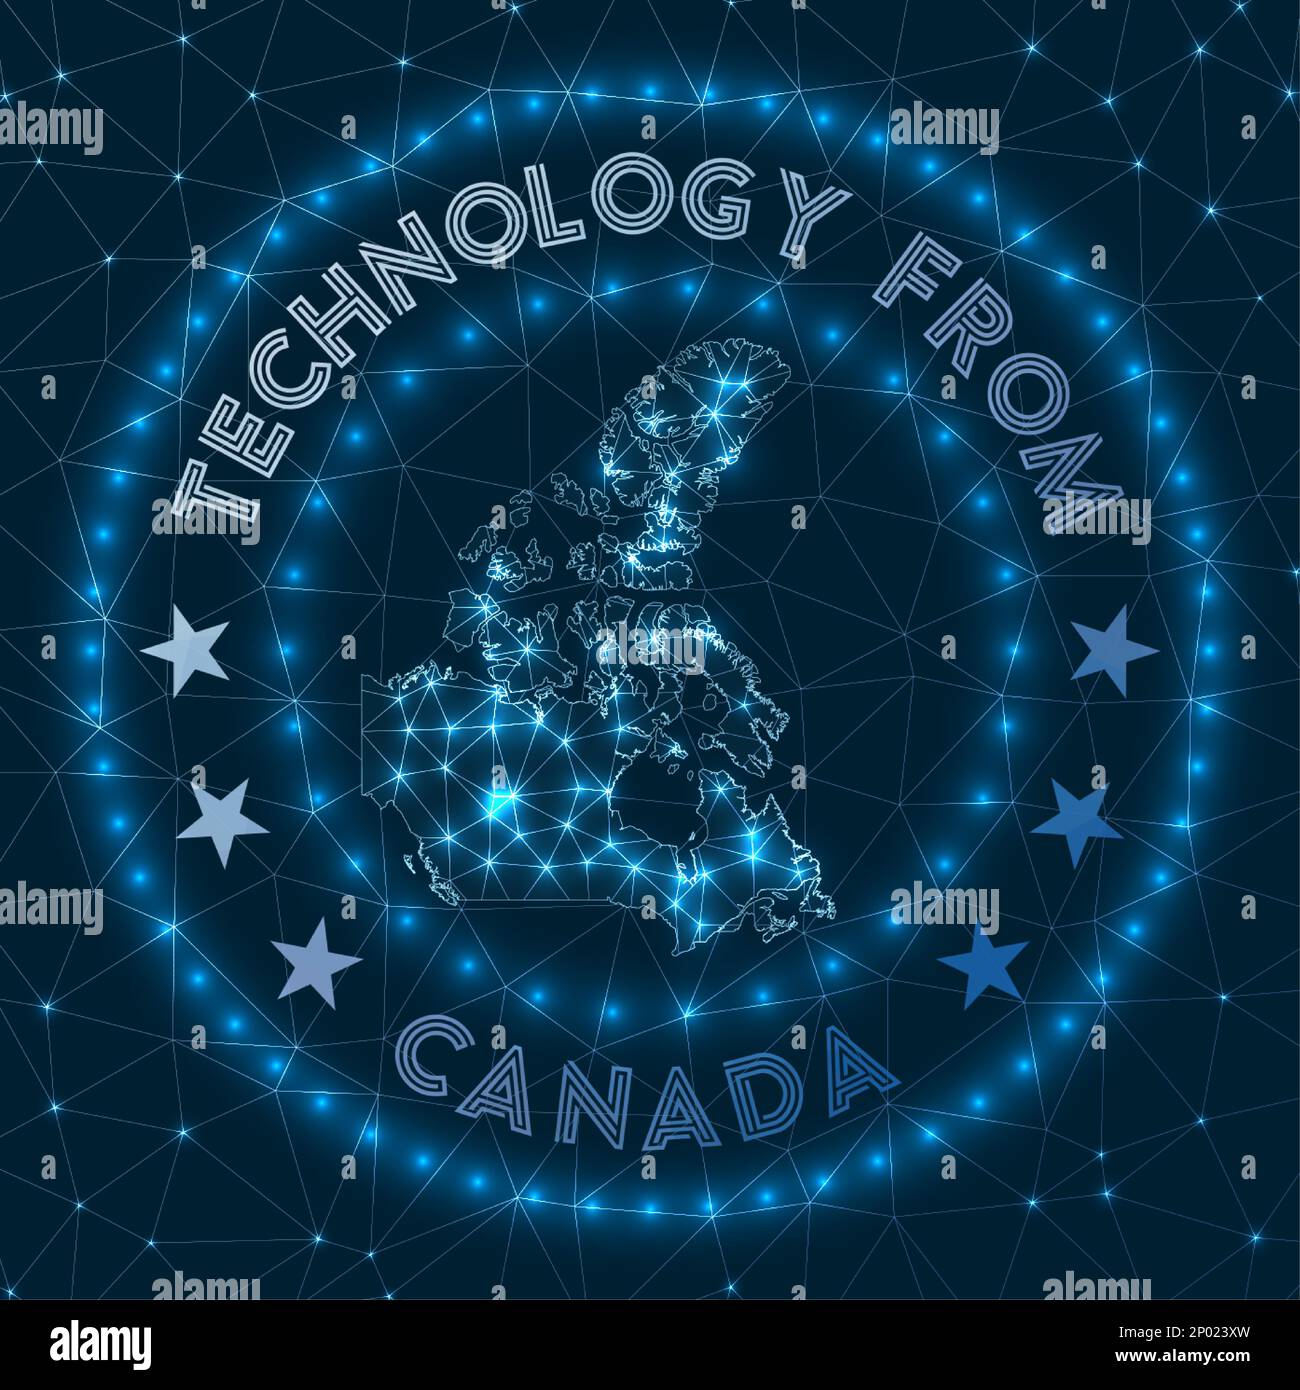 Technology From Canada. Futuristic geometric badge of the country. Technological concept. Round Canada logo. Vector illustration. Stock Vector